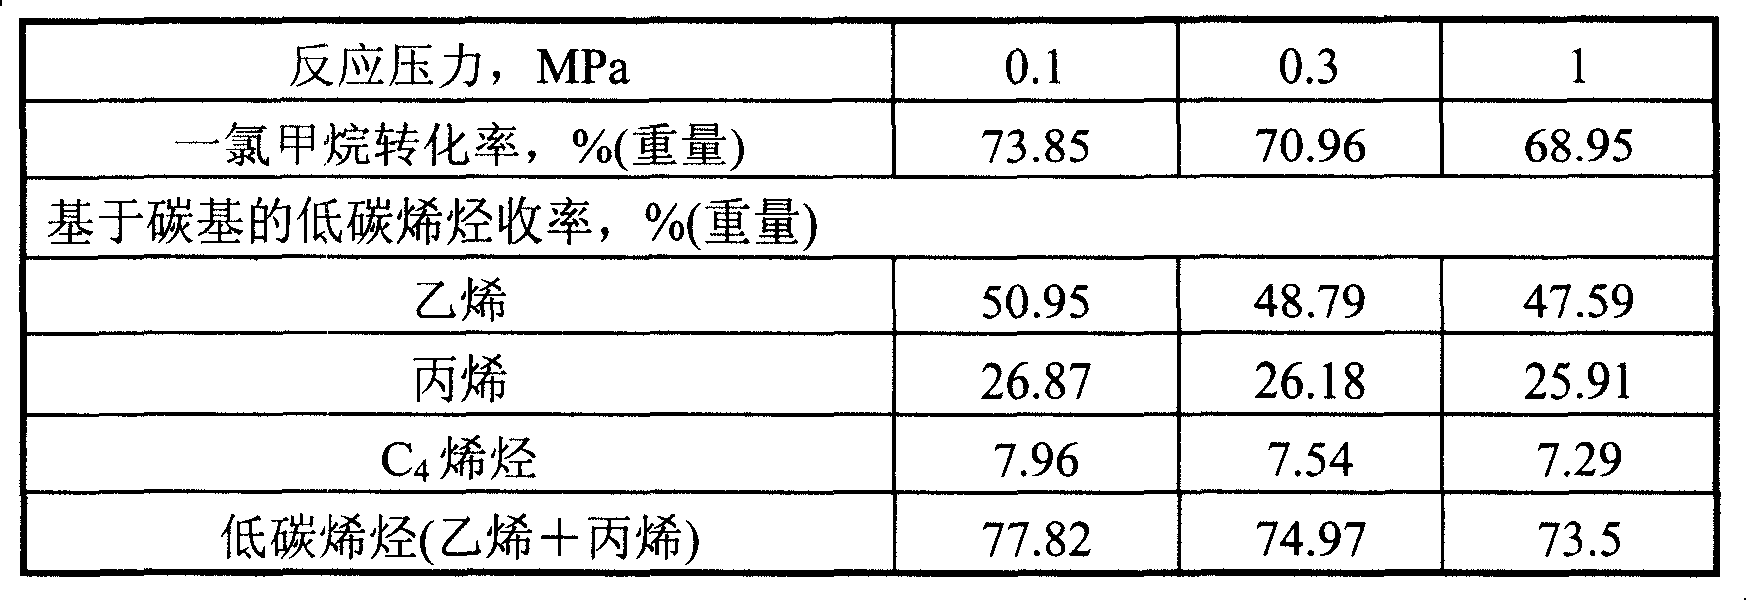 Method for producing low-carbon olefins